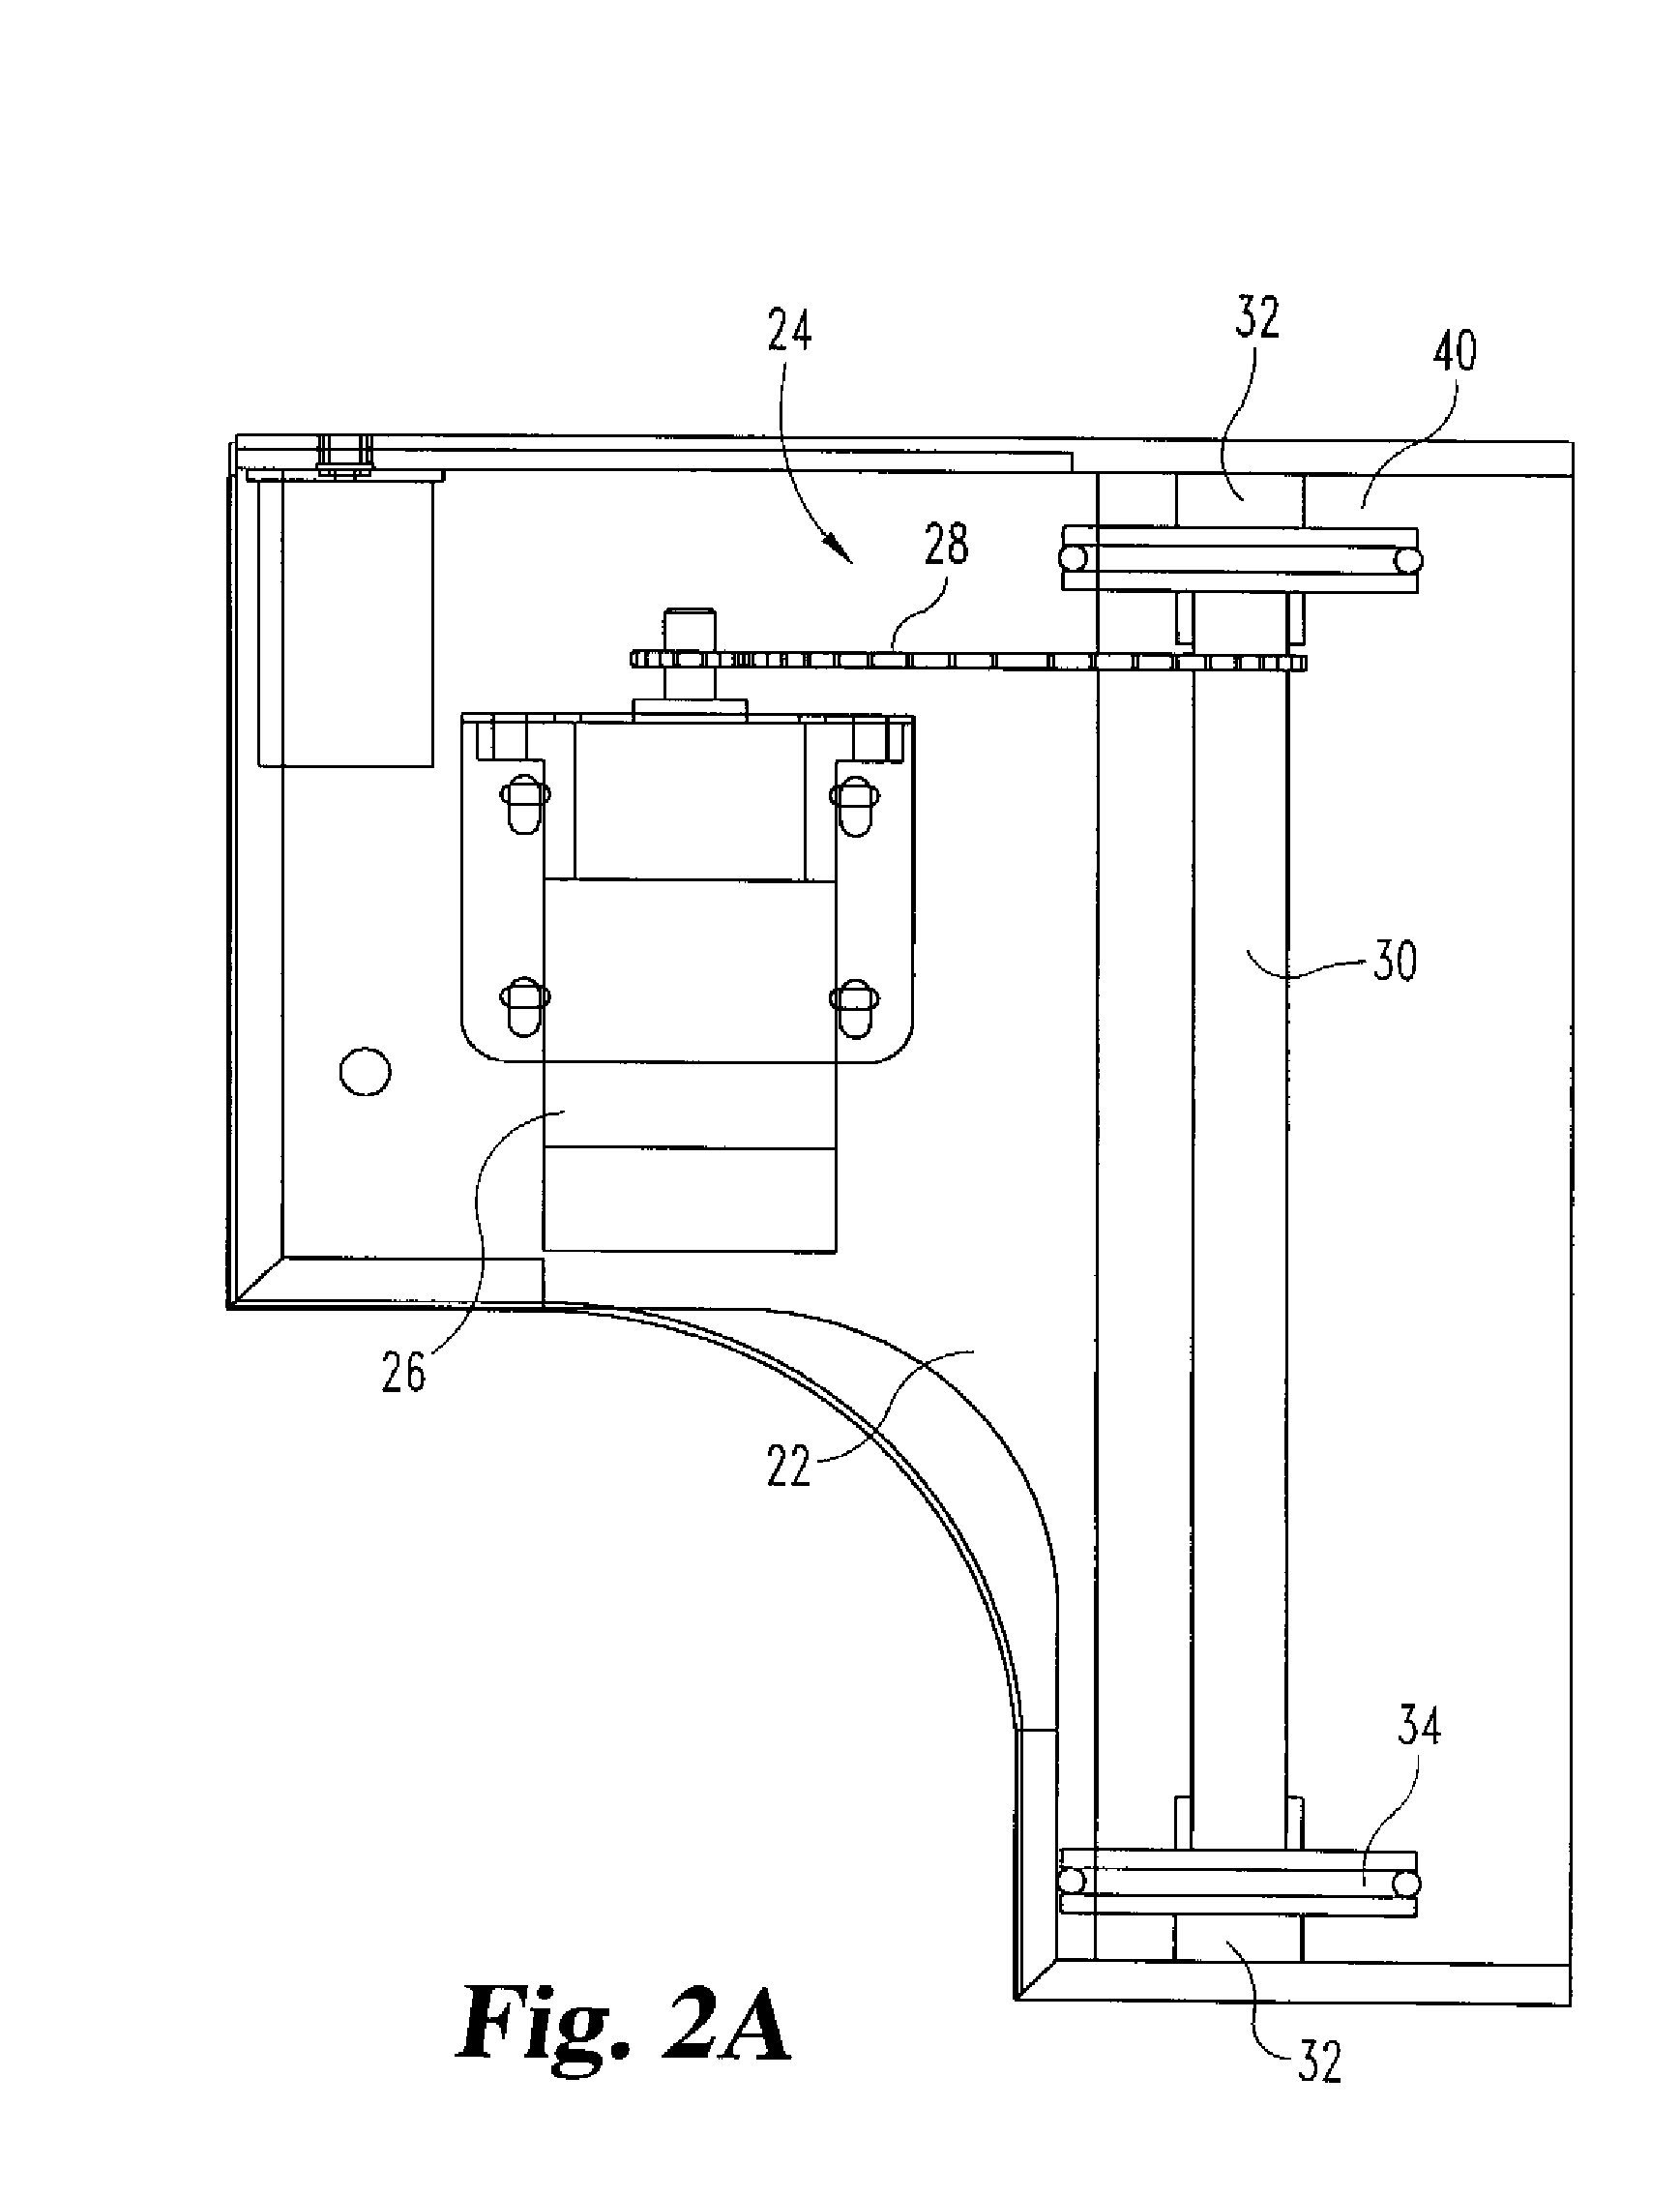 Automatic Food Product Breading Apparatus